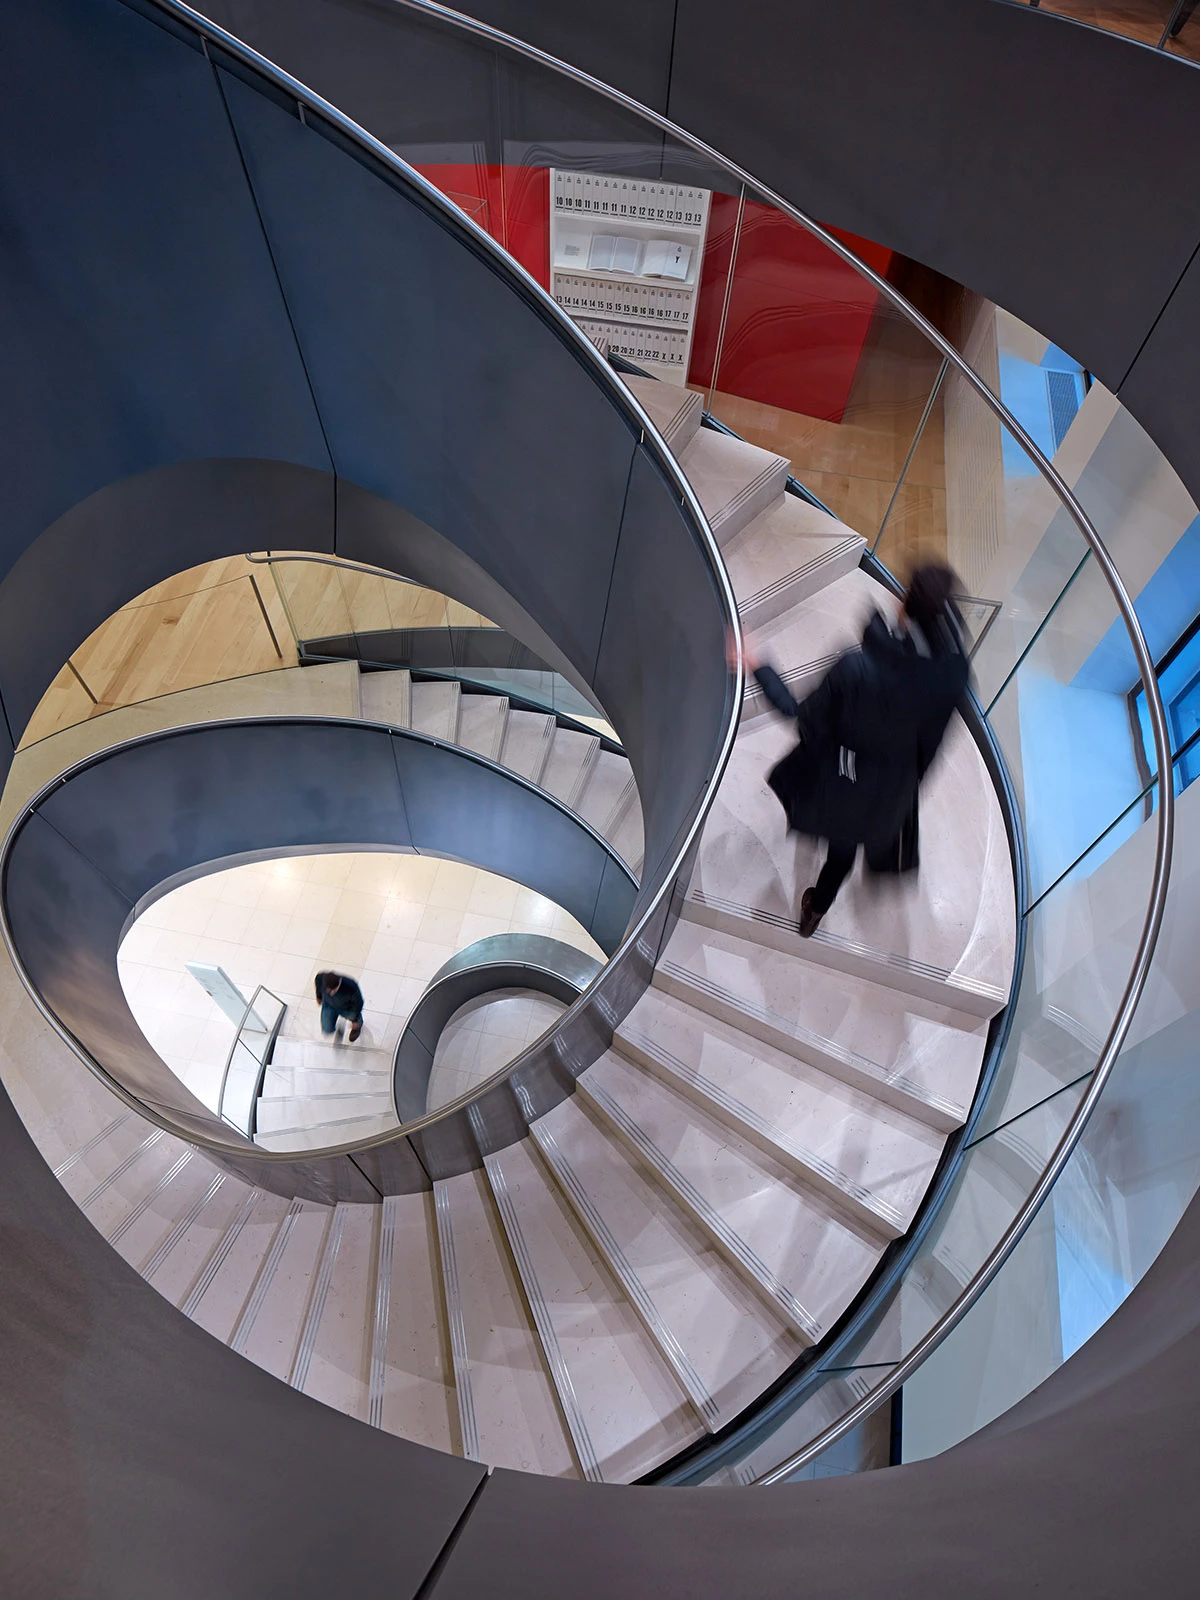 Interior spiral stairwell of the Wellcome Centre